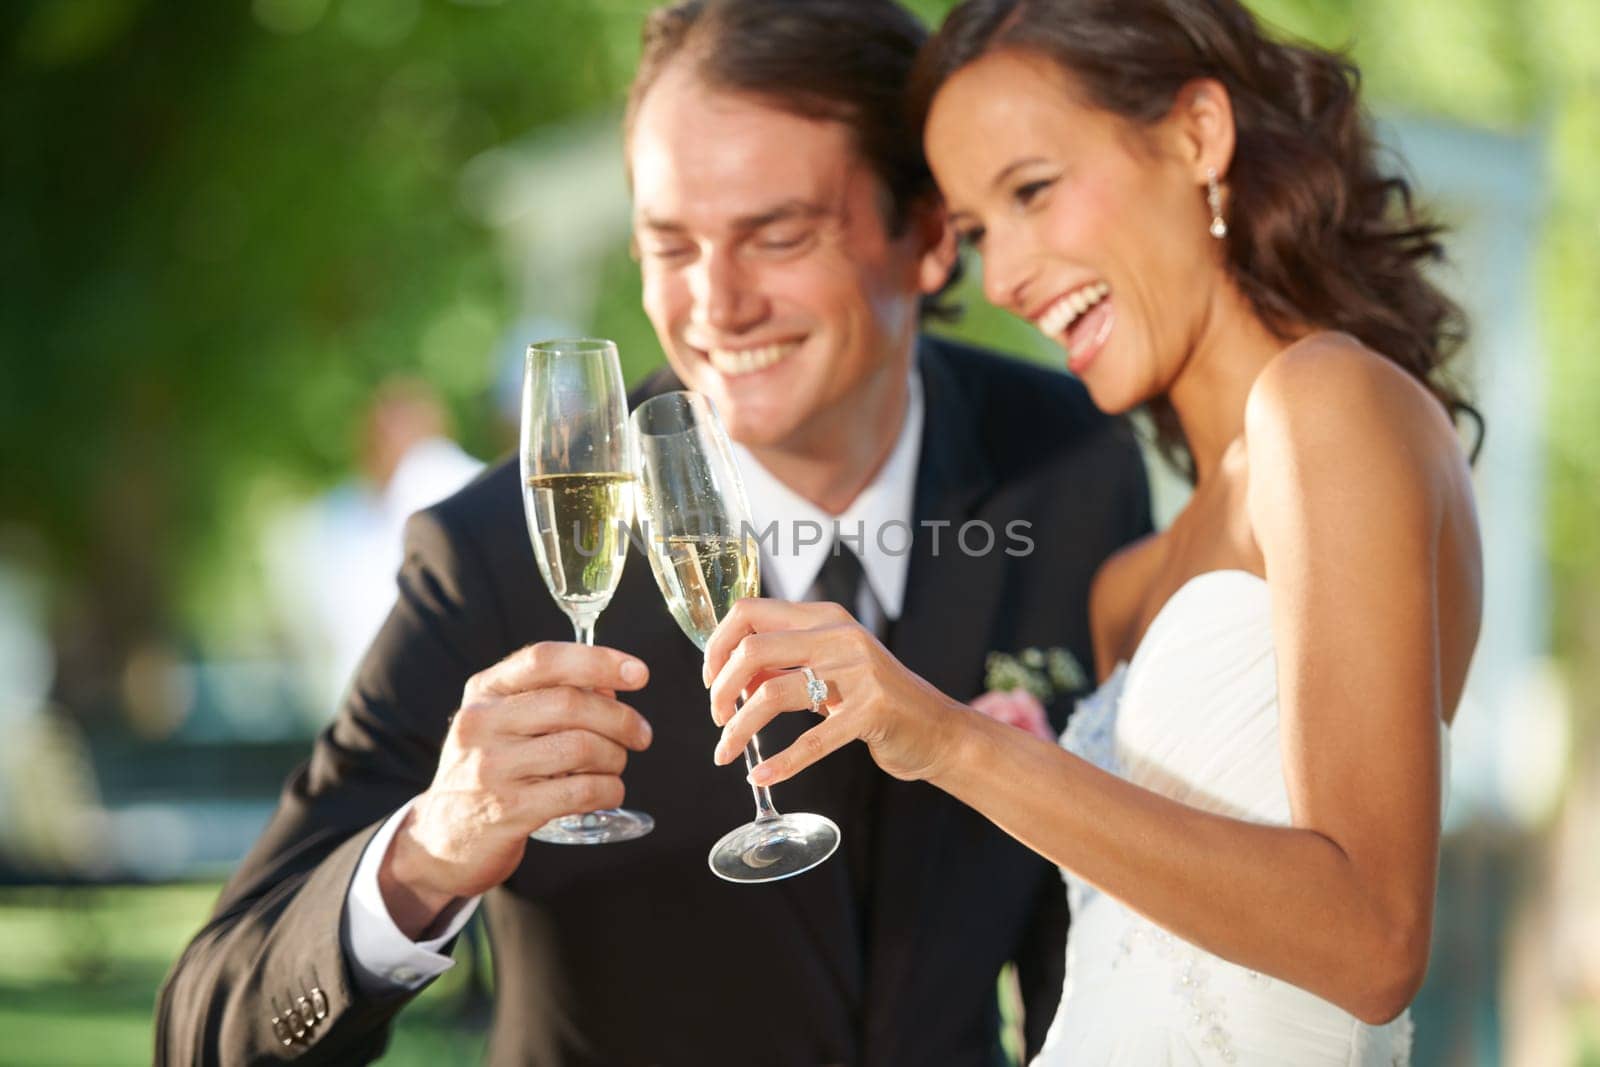 Outdoor, champagne and bride with groom, hug and support with relationship, romance and celebration. Romantic, outside or man with woman, marriage or happiness with love, cheers or wedding with smile.